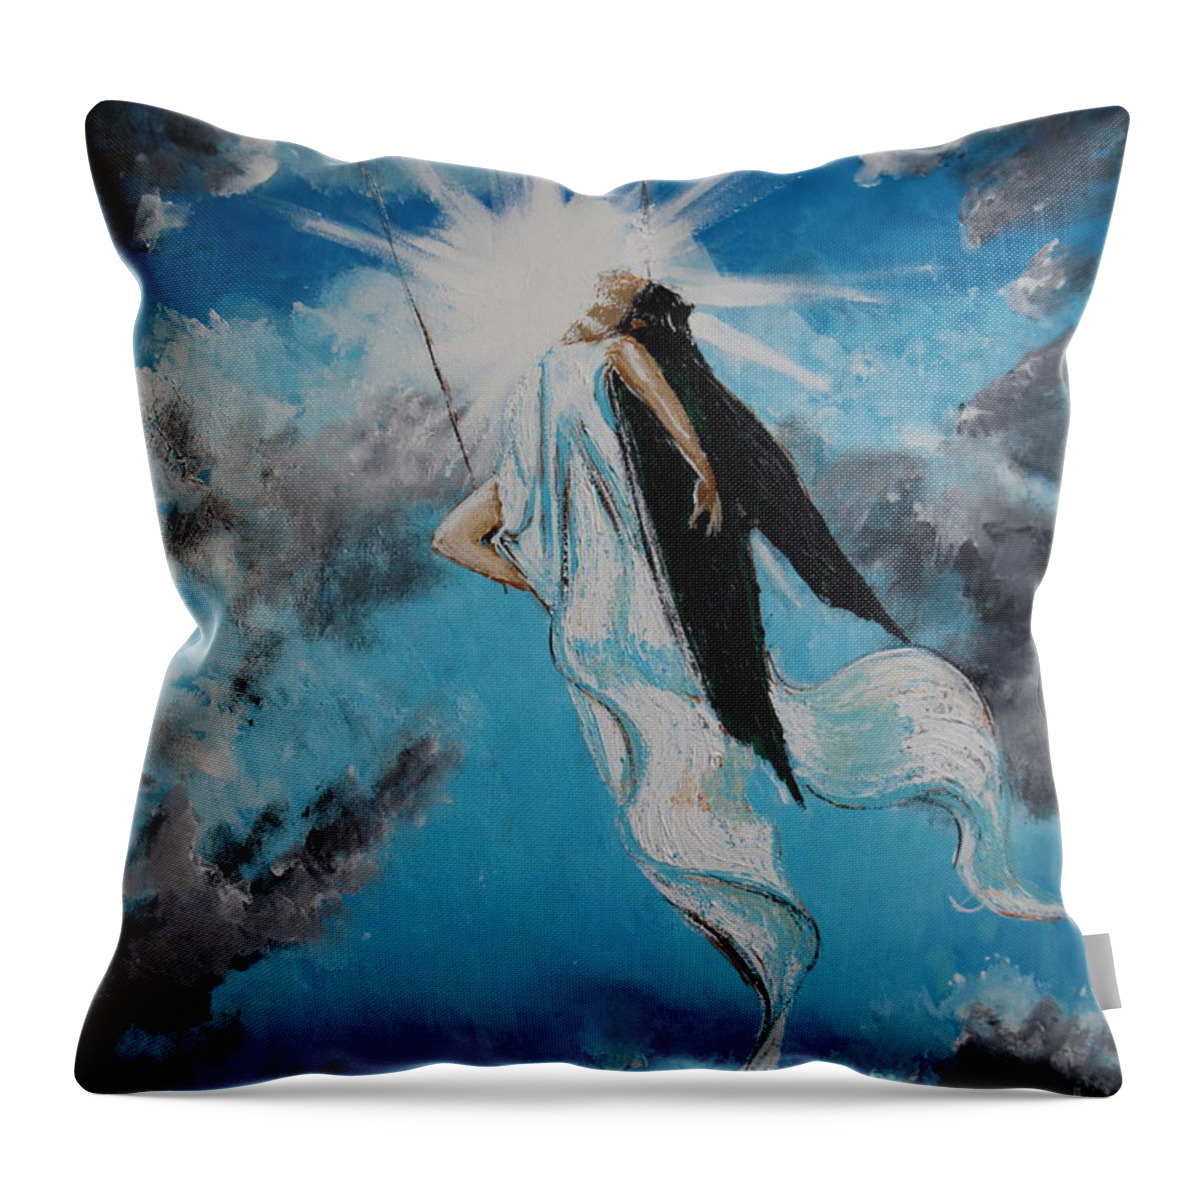 Impressionism Throw Pillow featuring the painting Ravesencion by Stefan Duncan